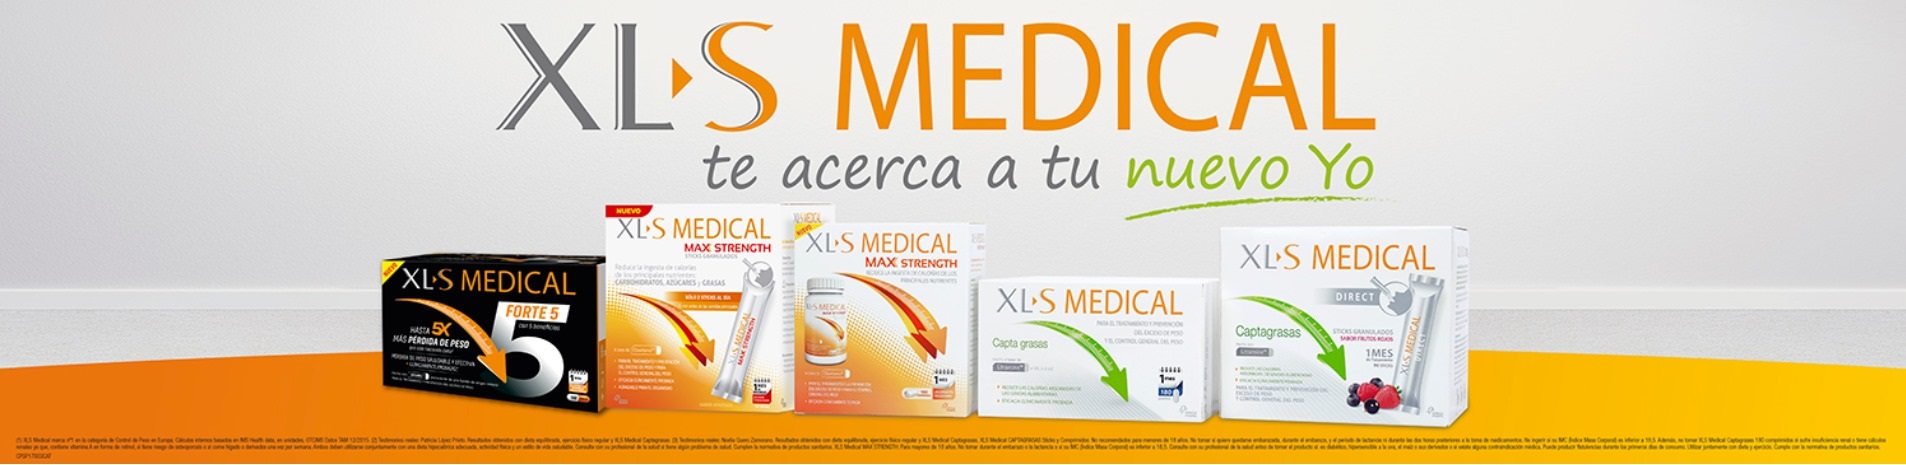 XLS MEDICAL Lose weight